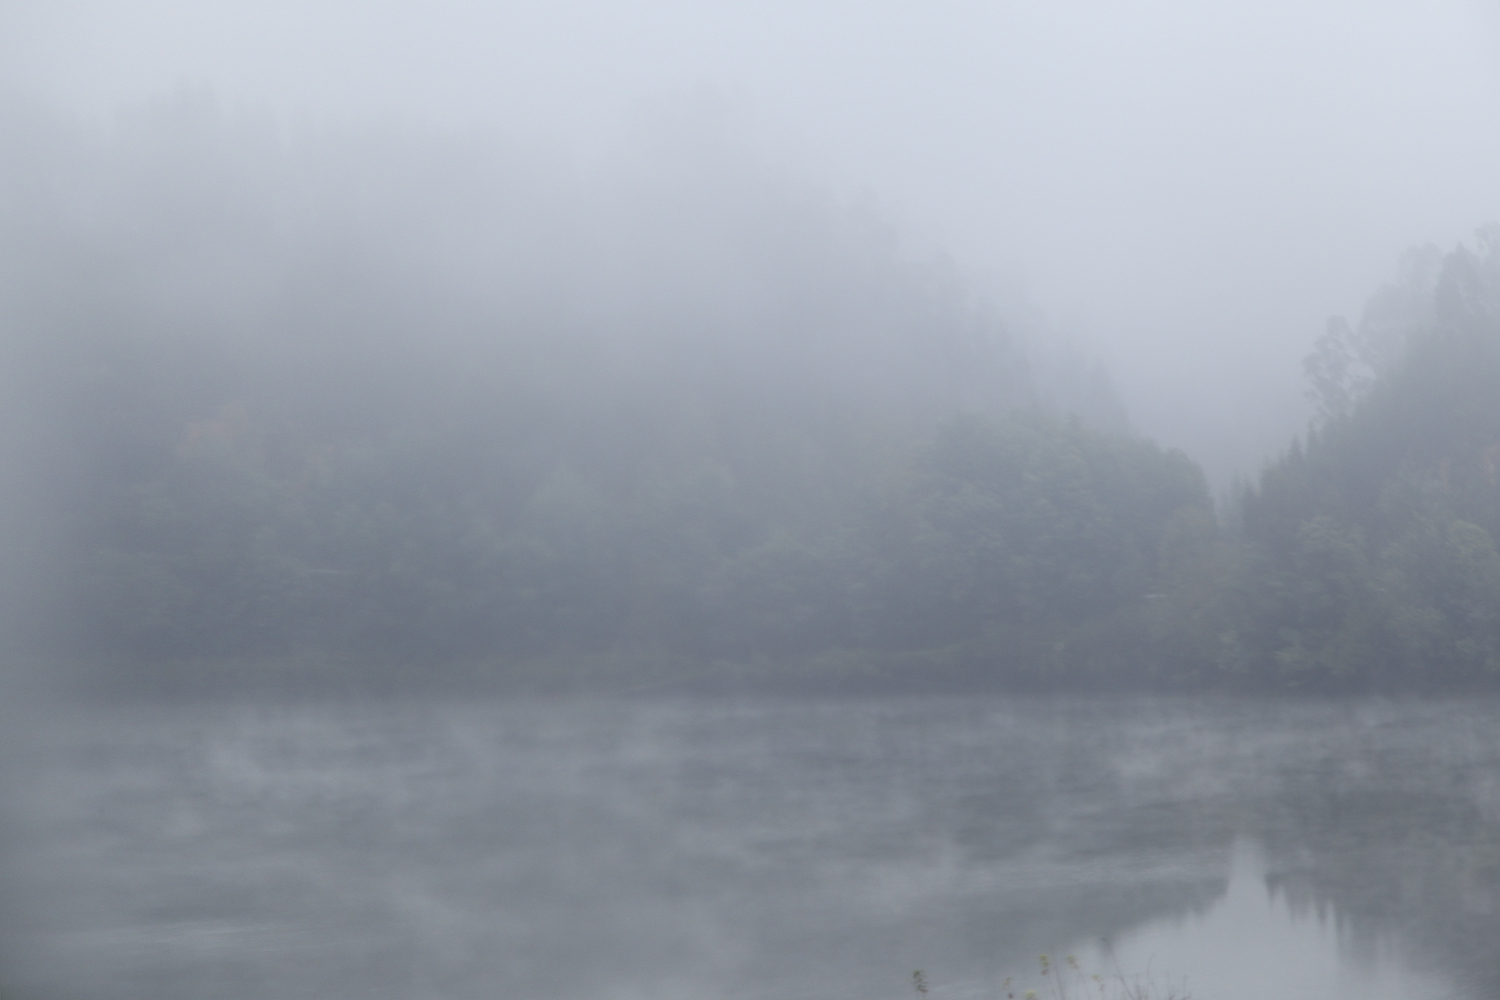 carina martins, time passing through montain - foggy lagoon with blue and grey tones 